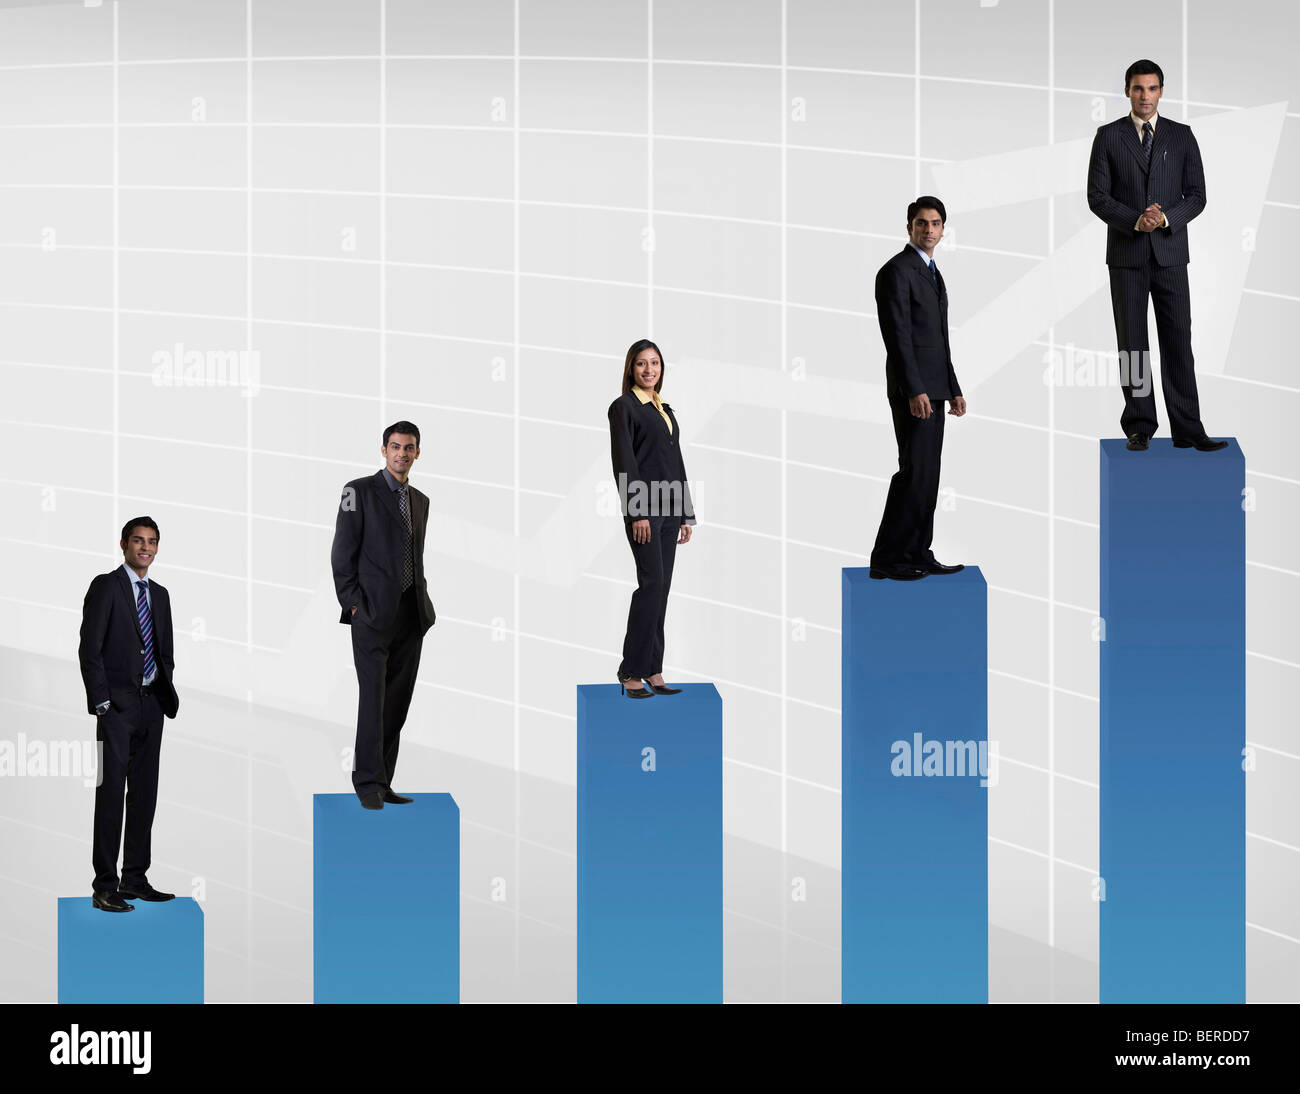 Businesspeople standing on a graph Stock Photo